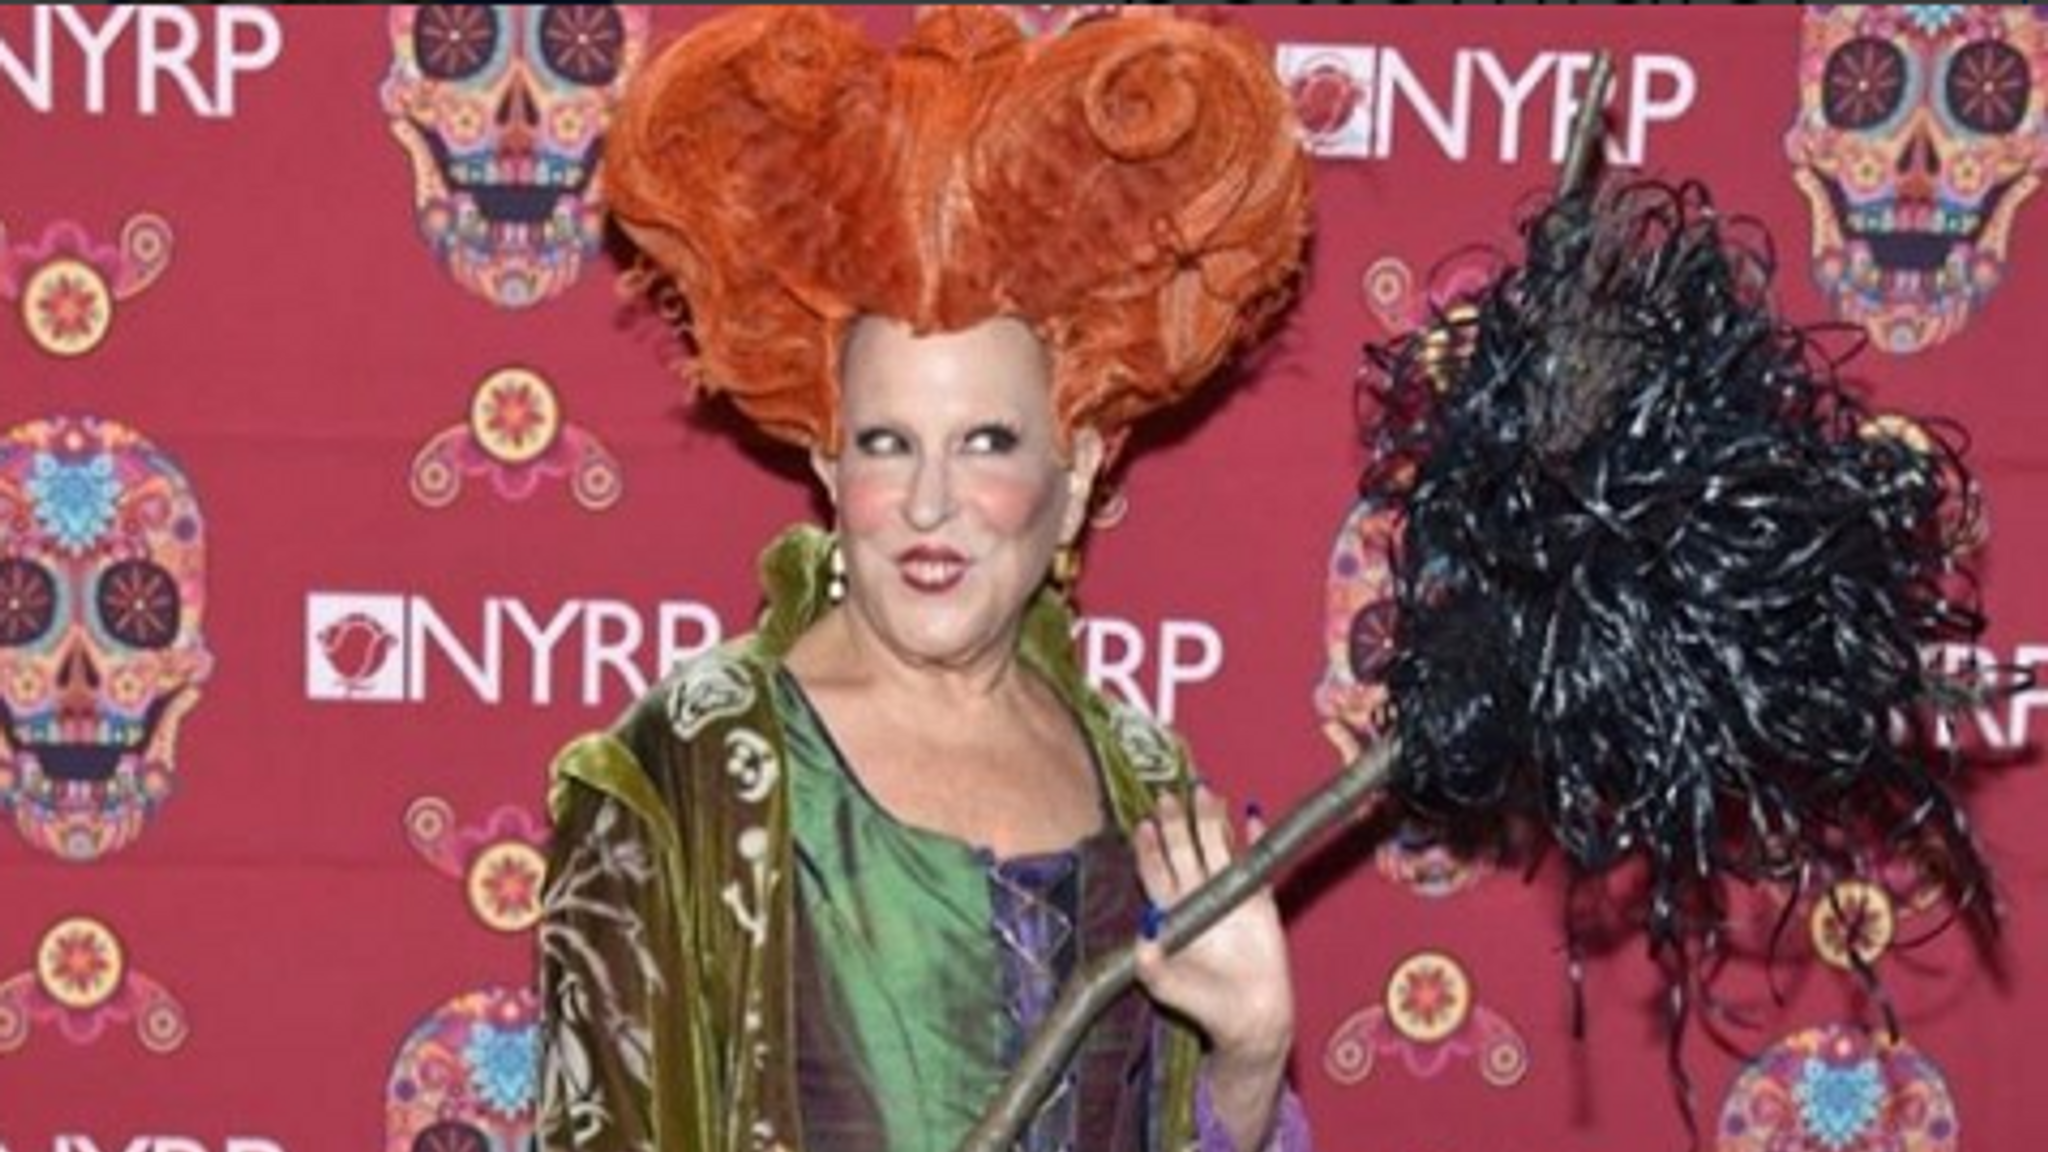 Bette Midler dressed up as... herself - when she played Winifred Sanderson in the 1993 Disney film Hocus Pocus